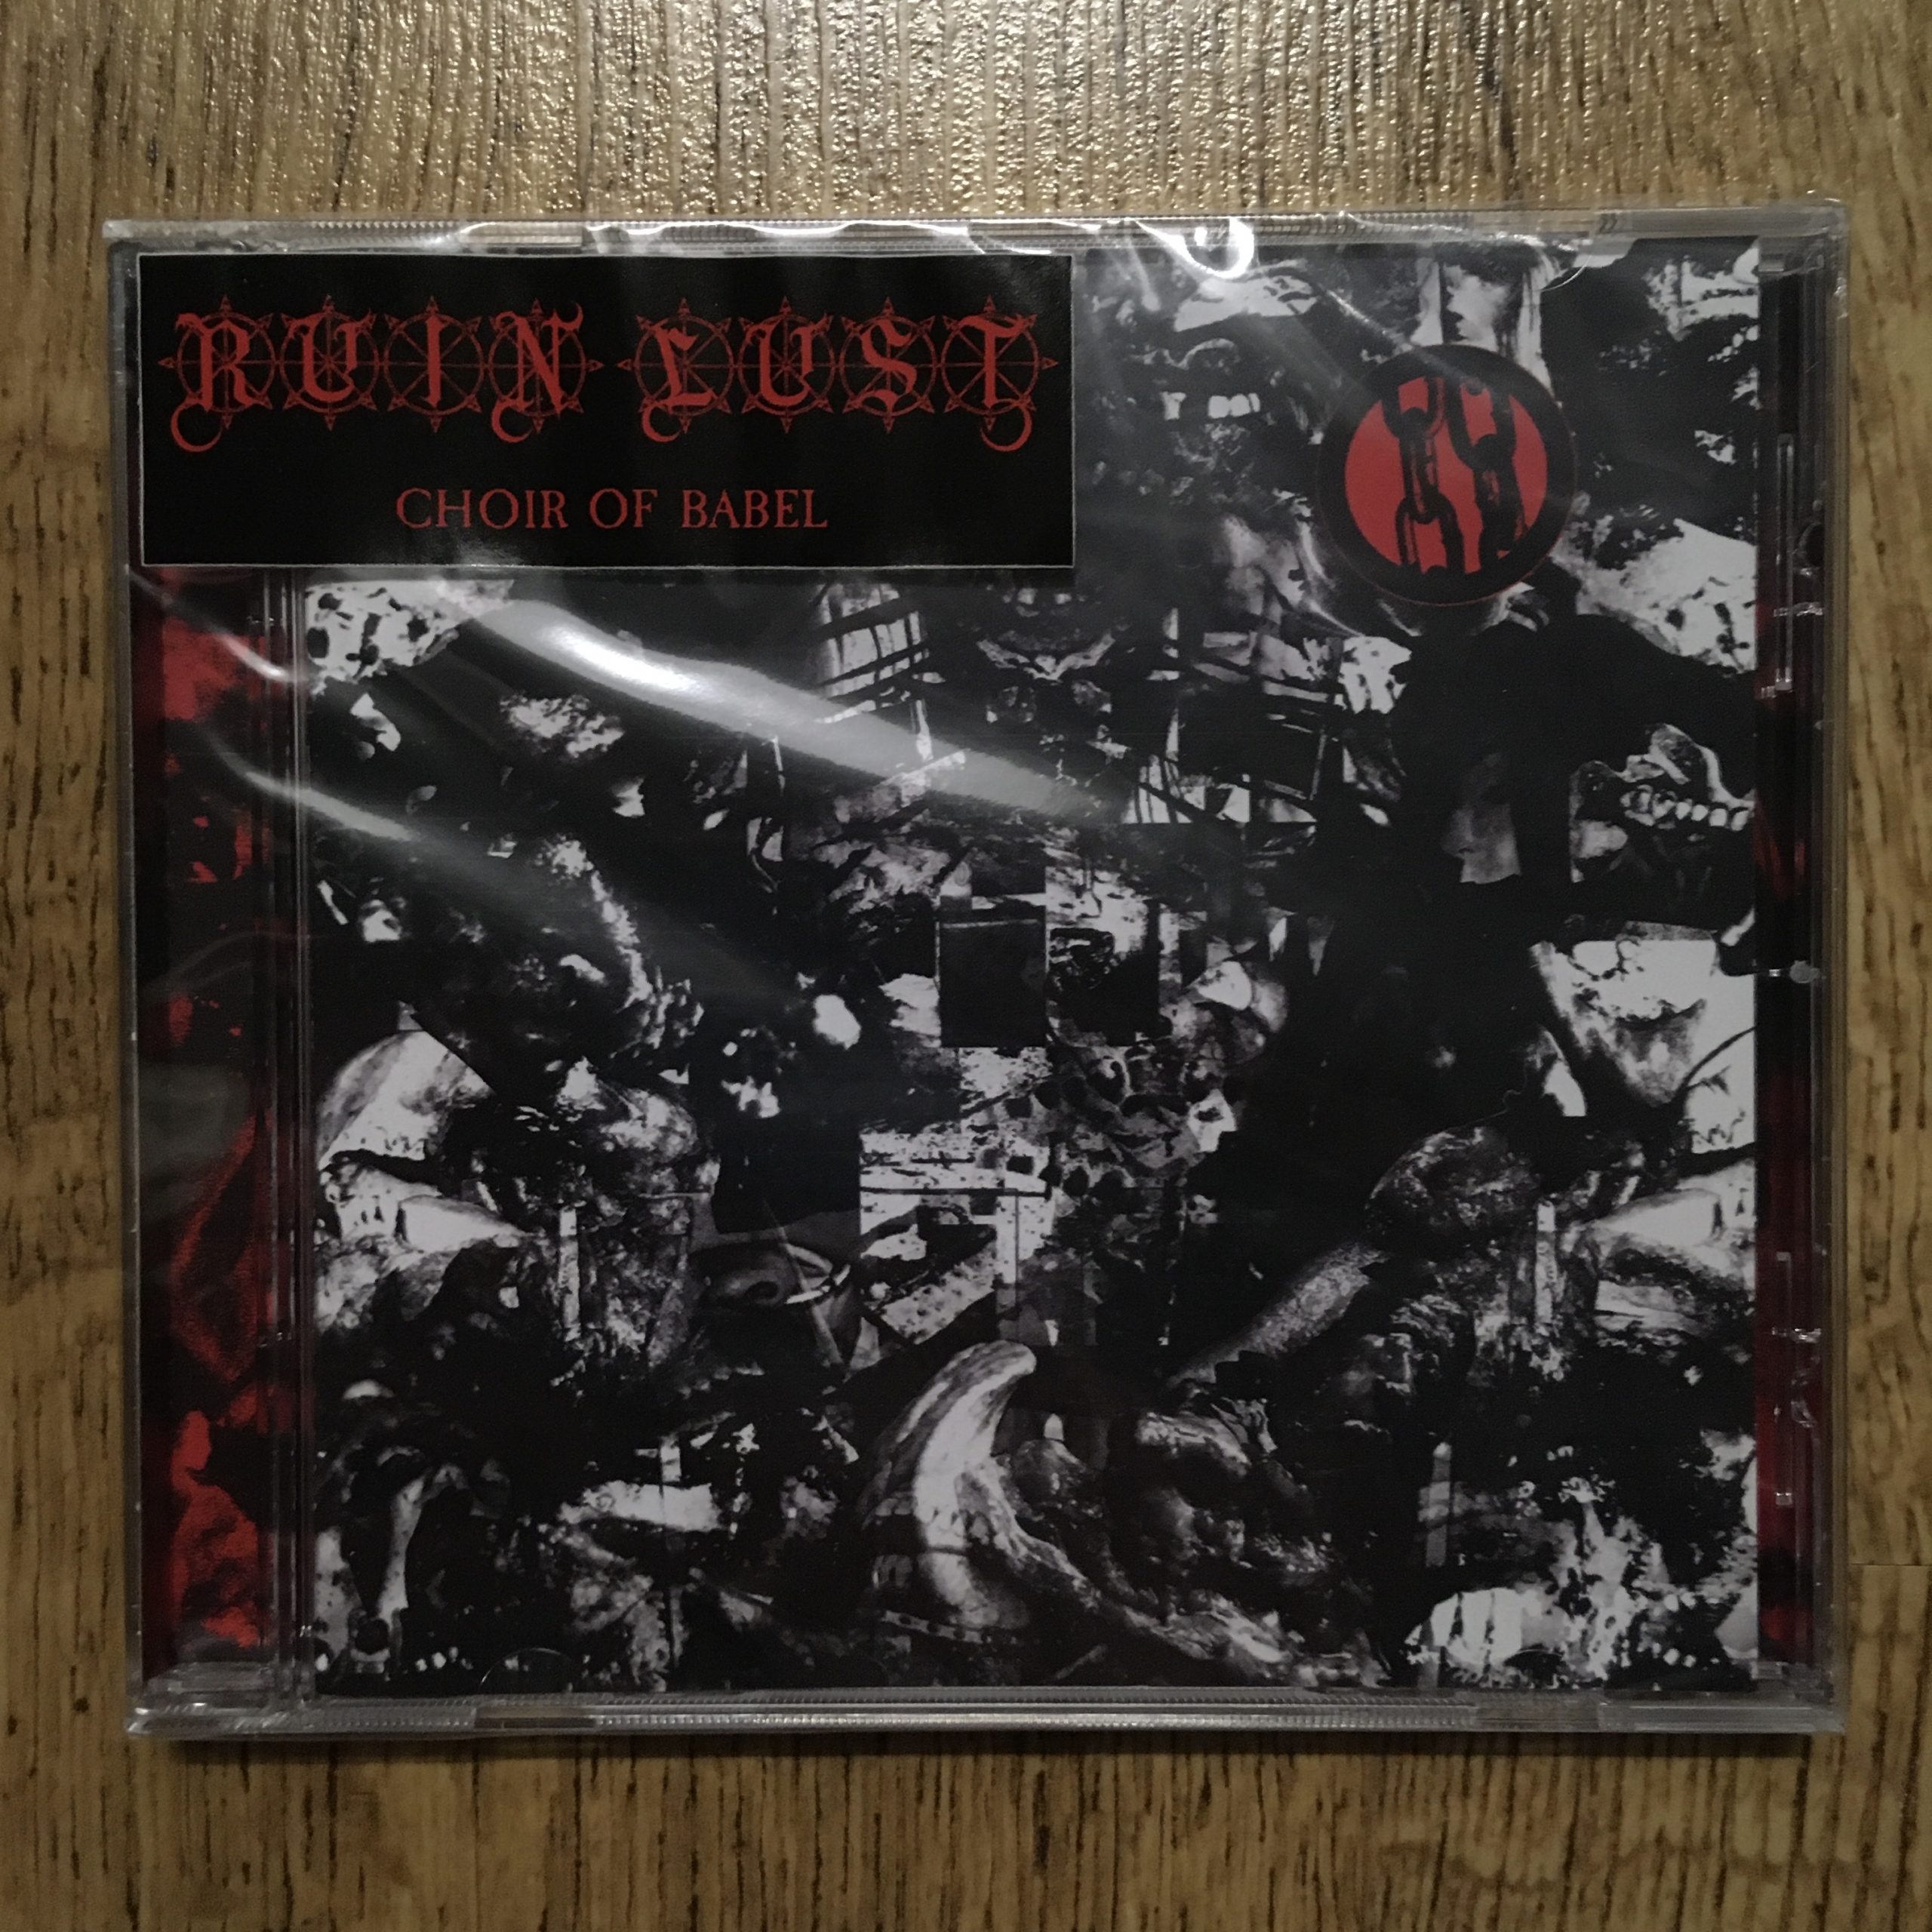 Photo of the Ruin Lust - "Choir of Babel" CD